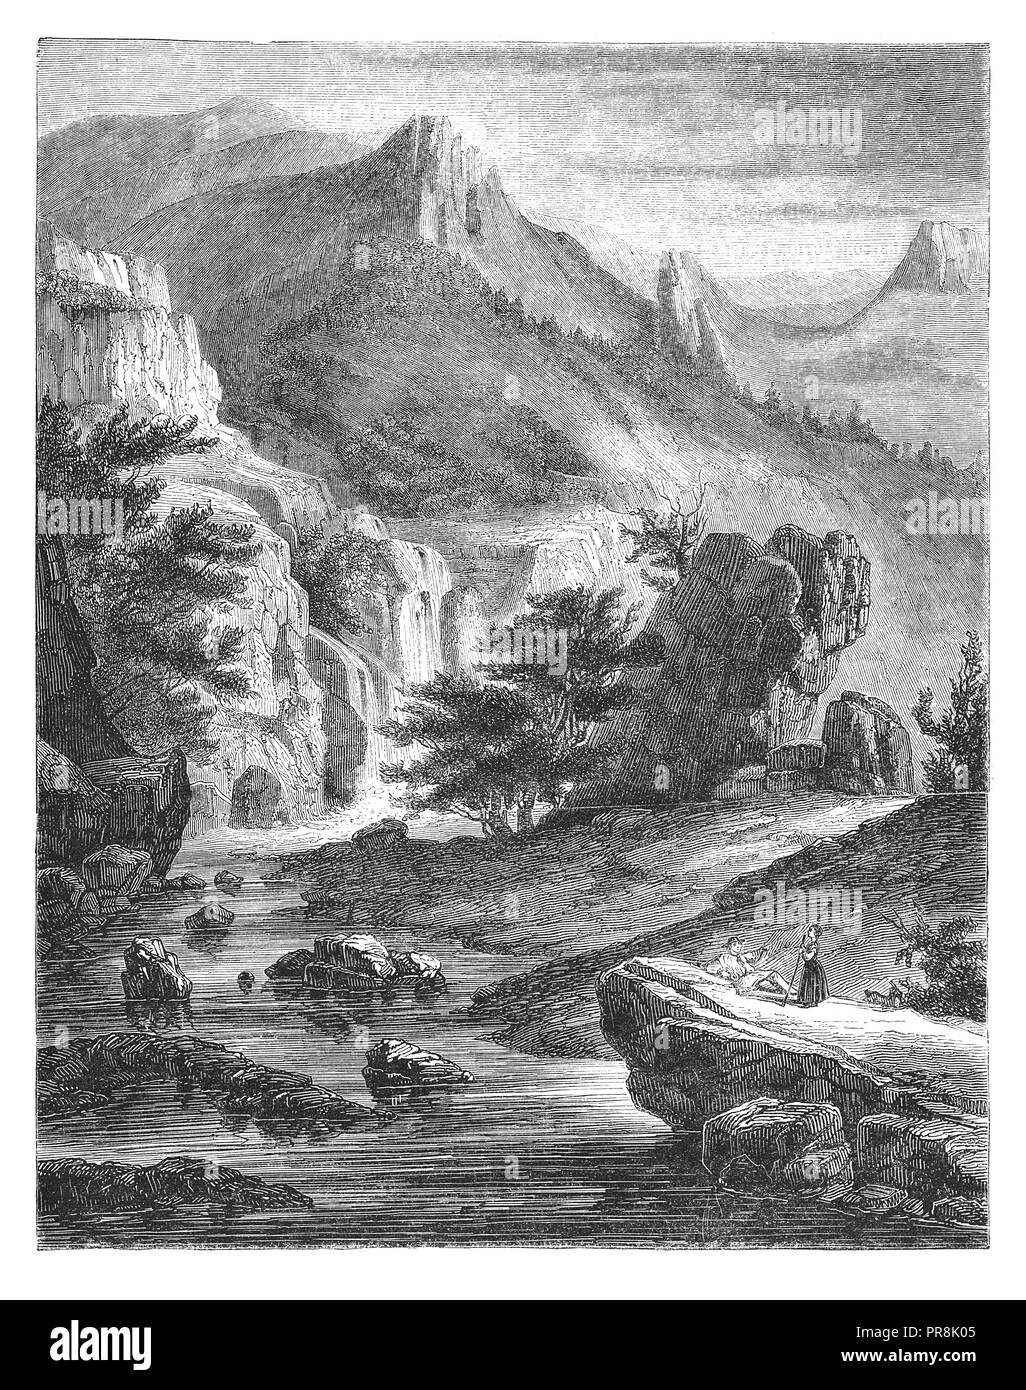 19th century illustration of view of the valley Chaudefour, in the department of Puy-de-Dôme, district of Issoire. Original artwork published in Le ma Stock Photo